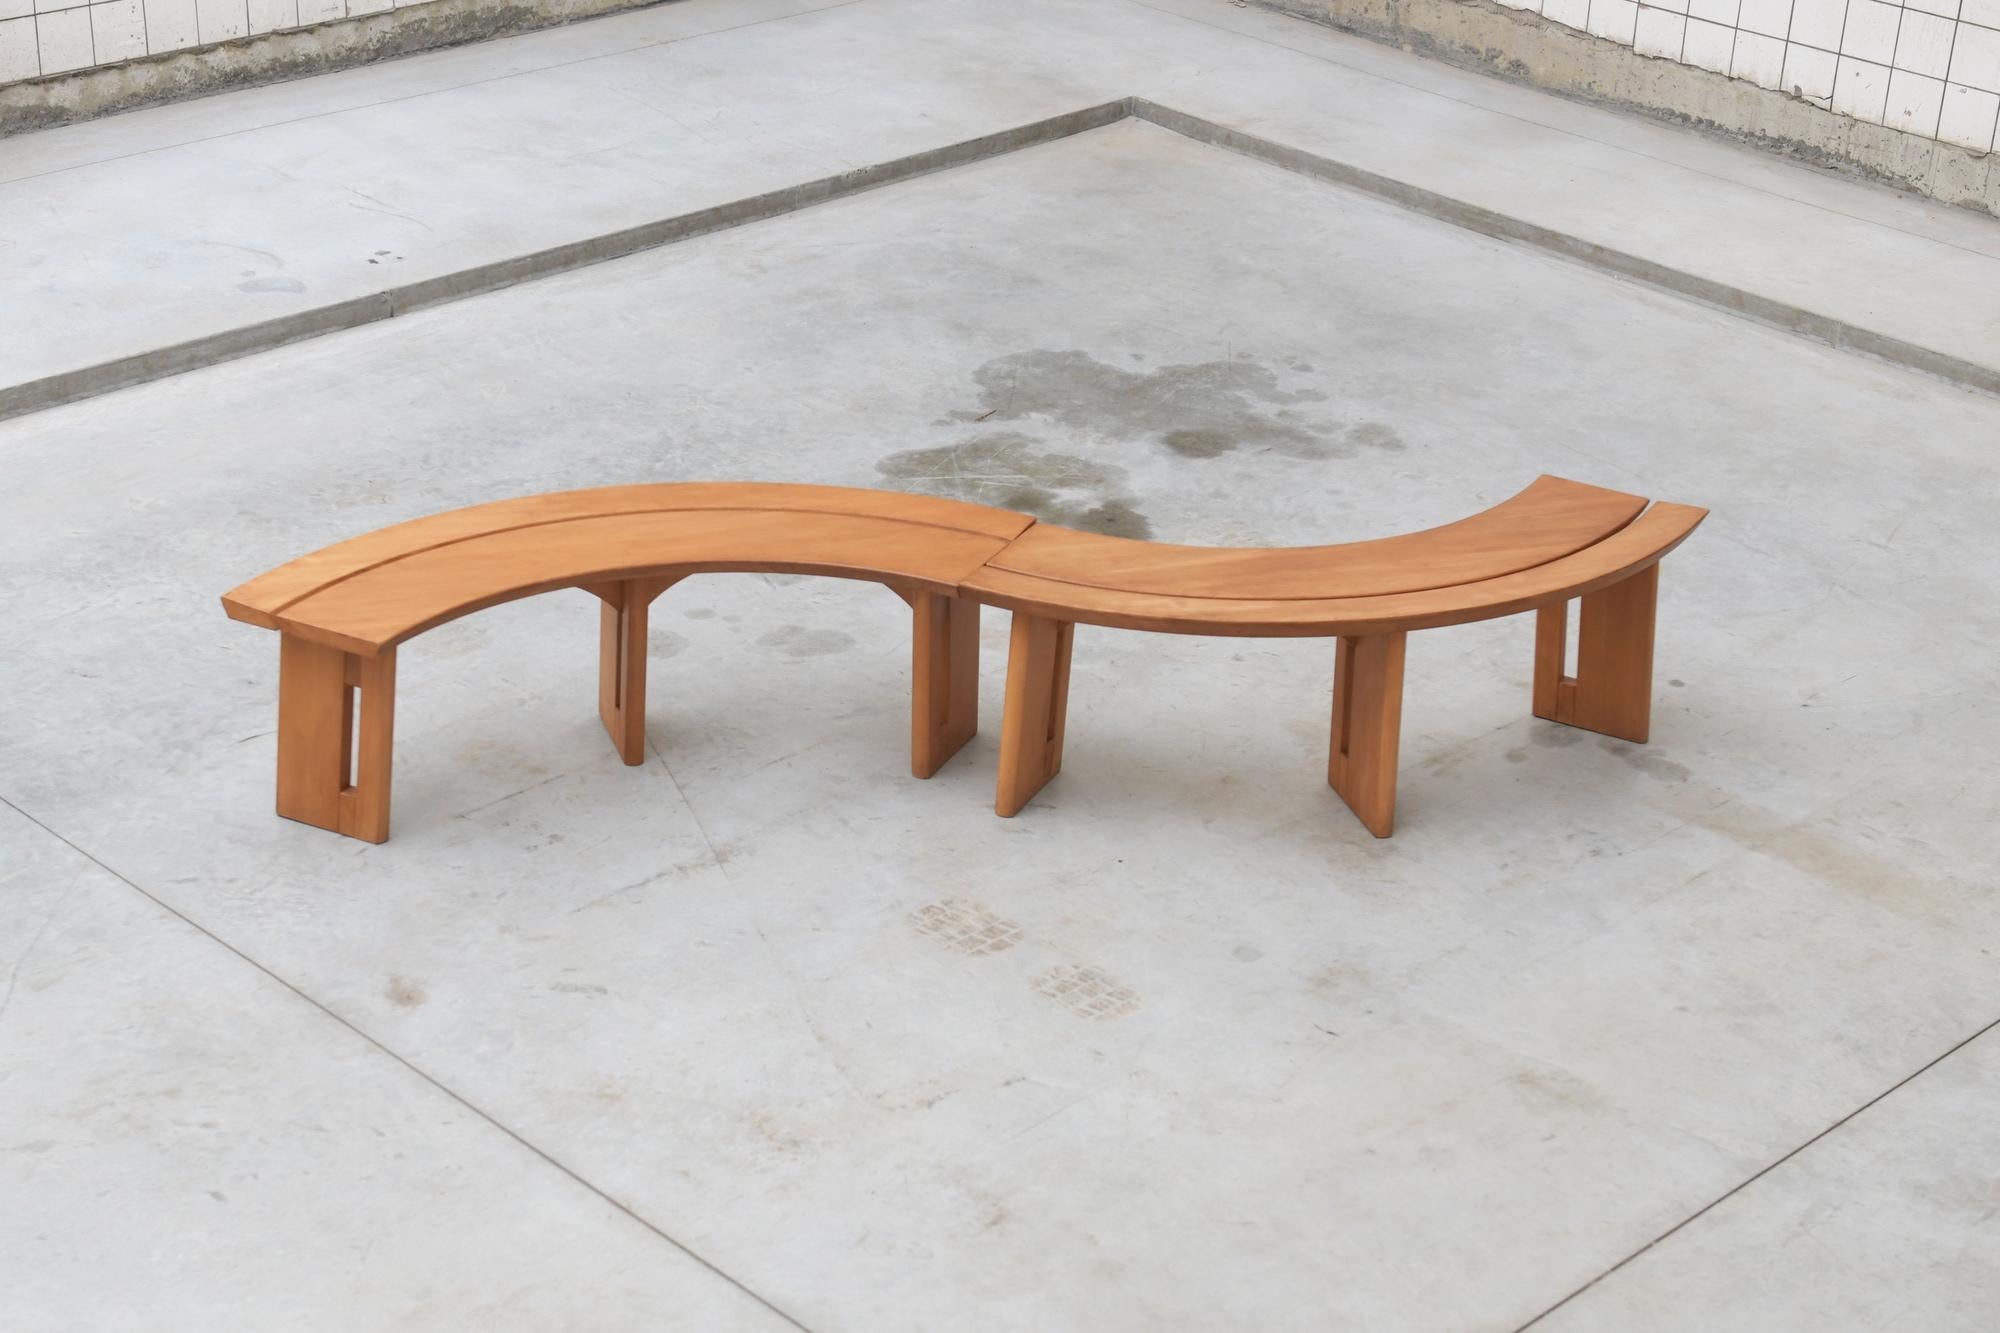 Stunning set of matching curved benches.
Mint condition.